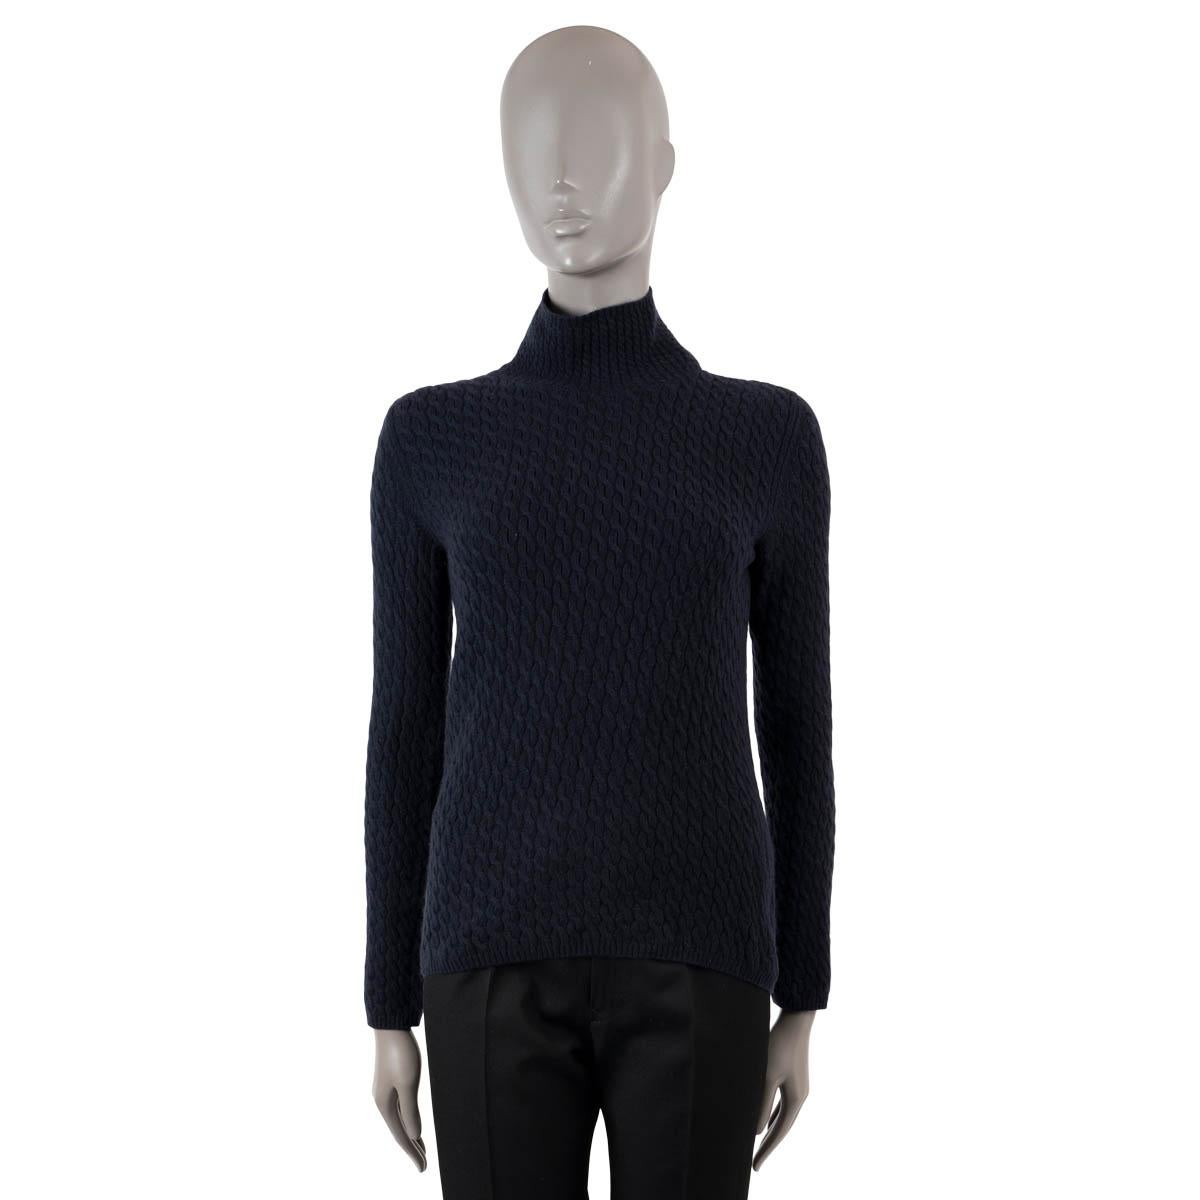 LORO PIANA navy blue cashmere CABLE KNIT MOCK NECK Sweater 44  fits S In Excellent Condition For Sale In Zürich, CH